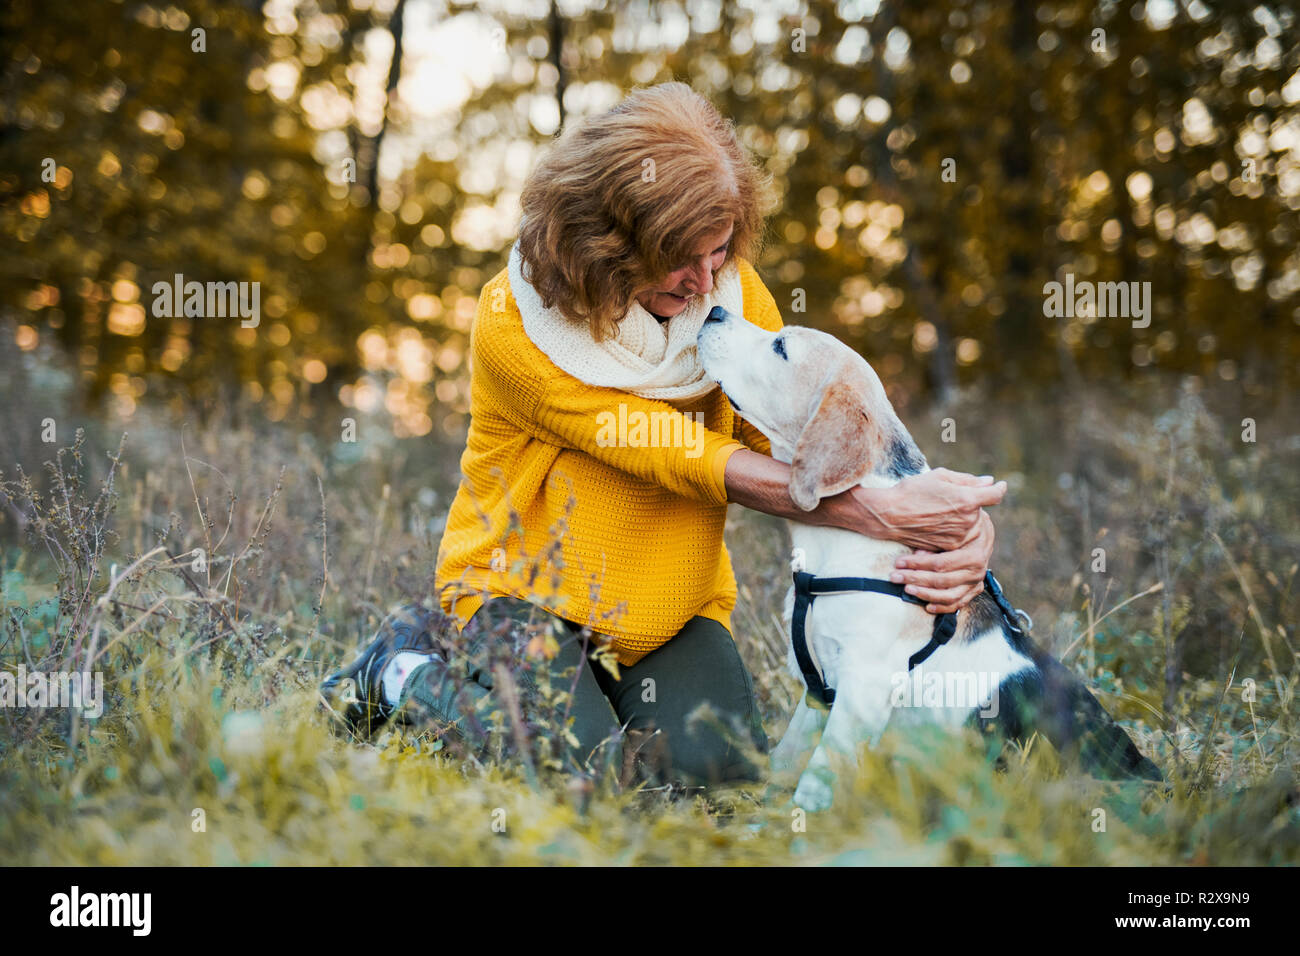 A senior woman with a dog in an autumn nature at sunset. Stock Photo